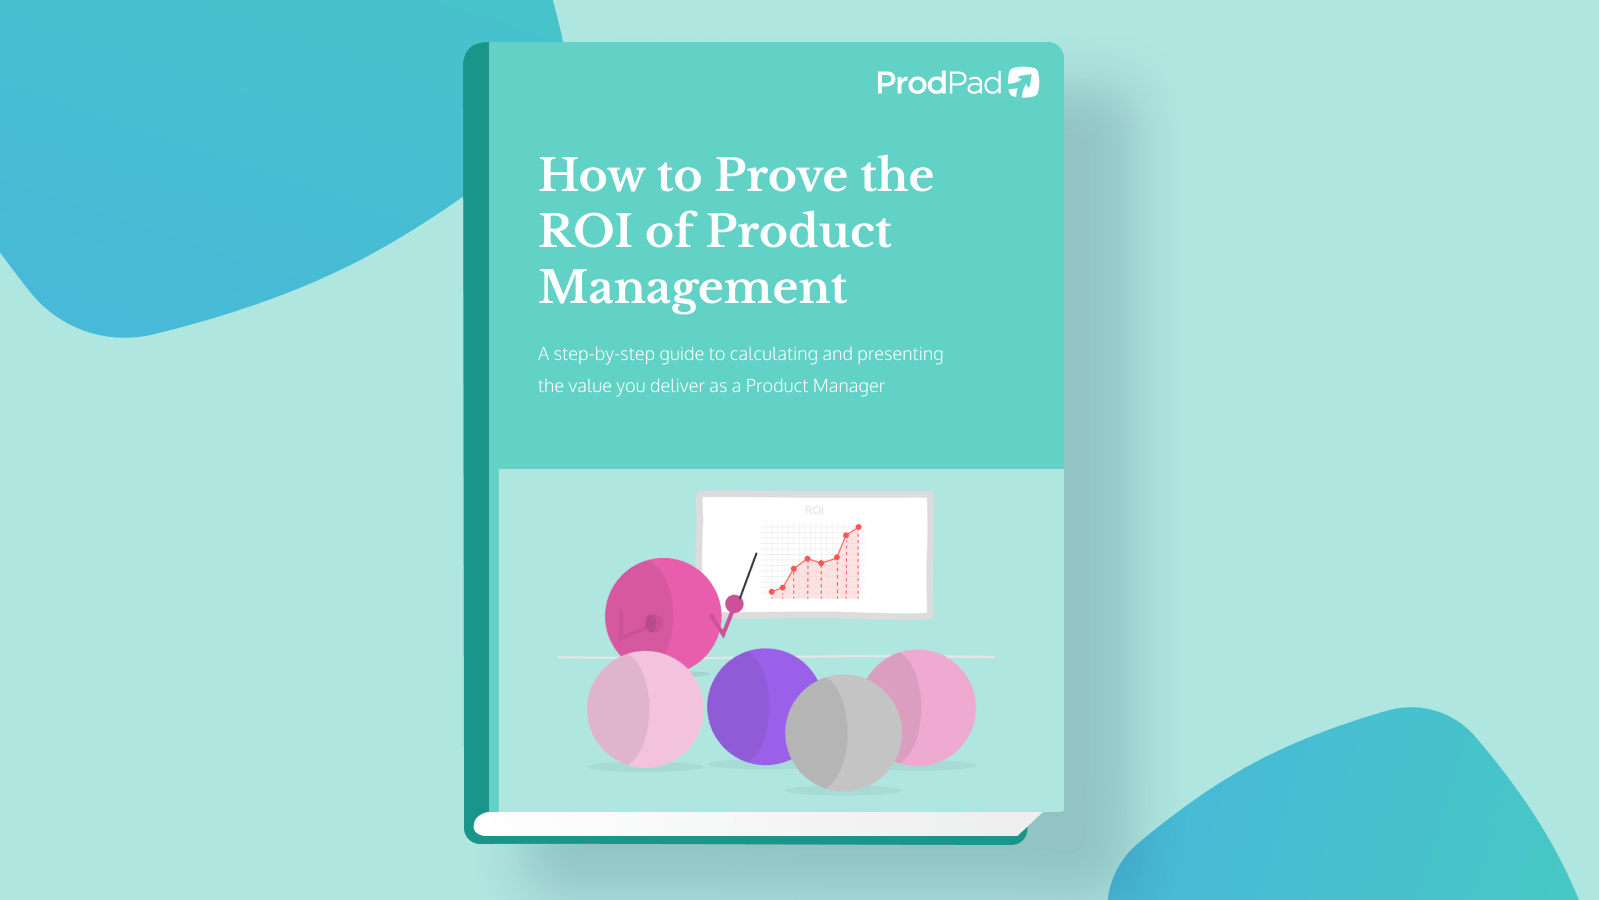 Get your practical guide to calculating the financial value you deliver as a Product Manager.